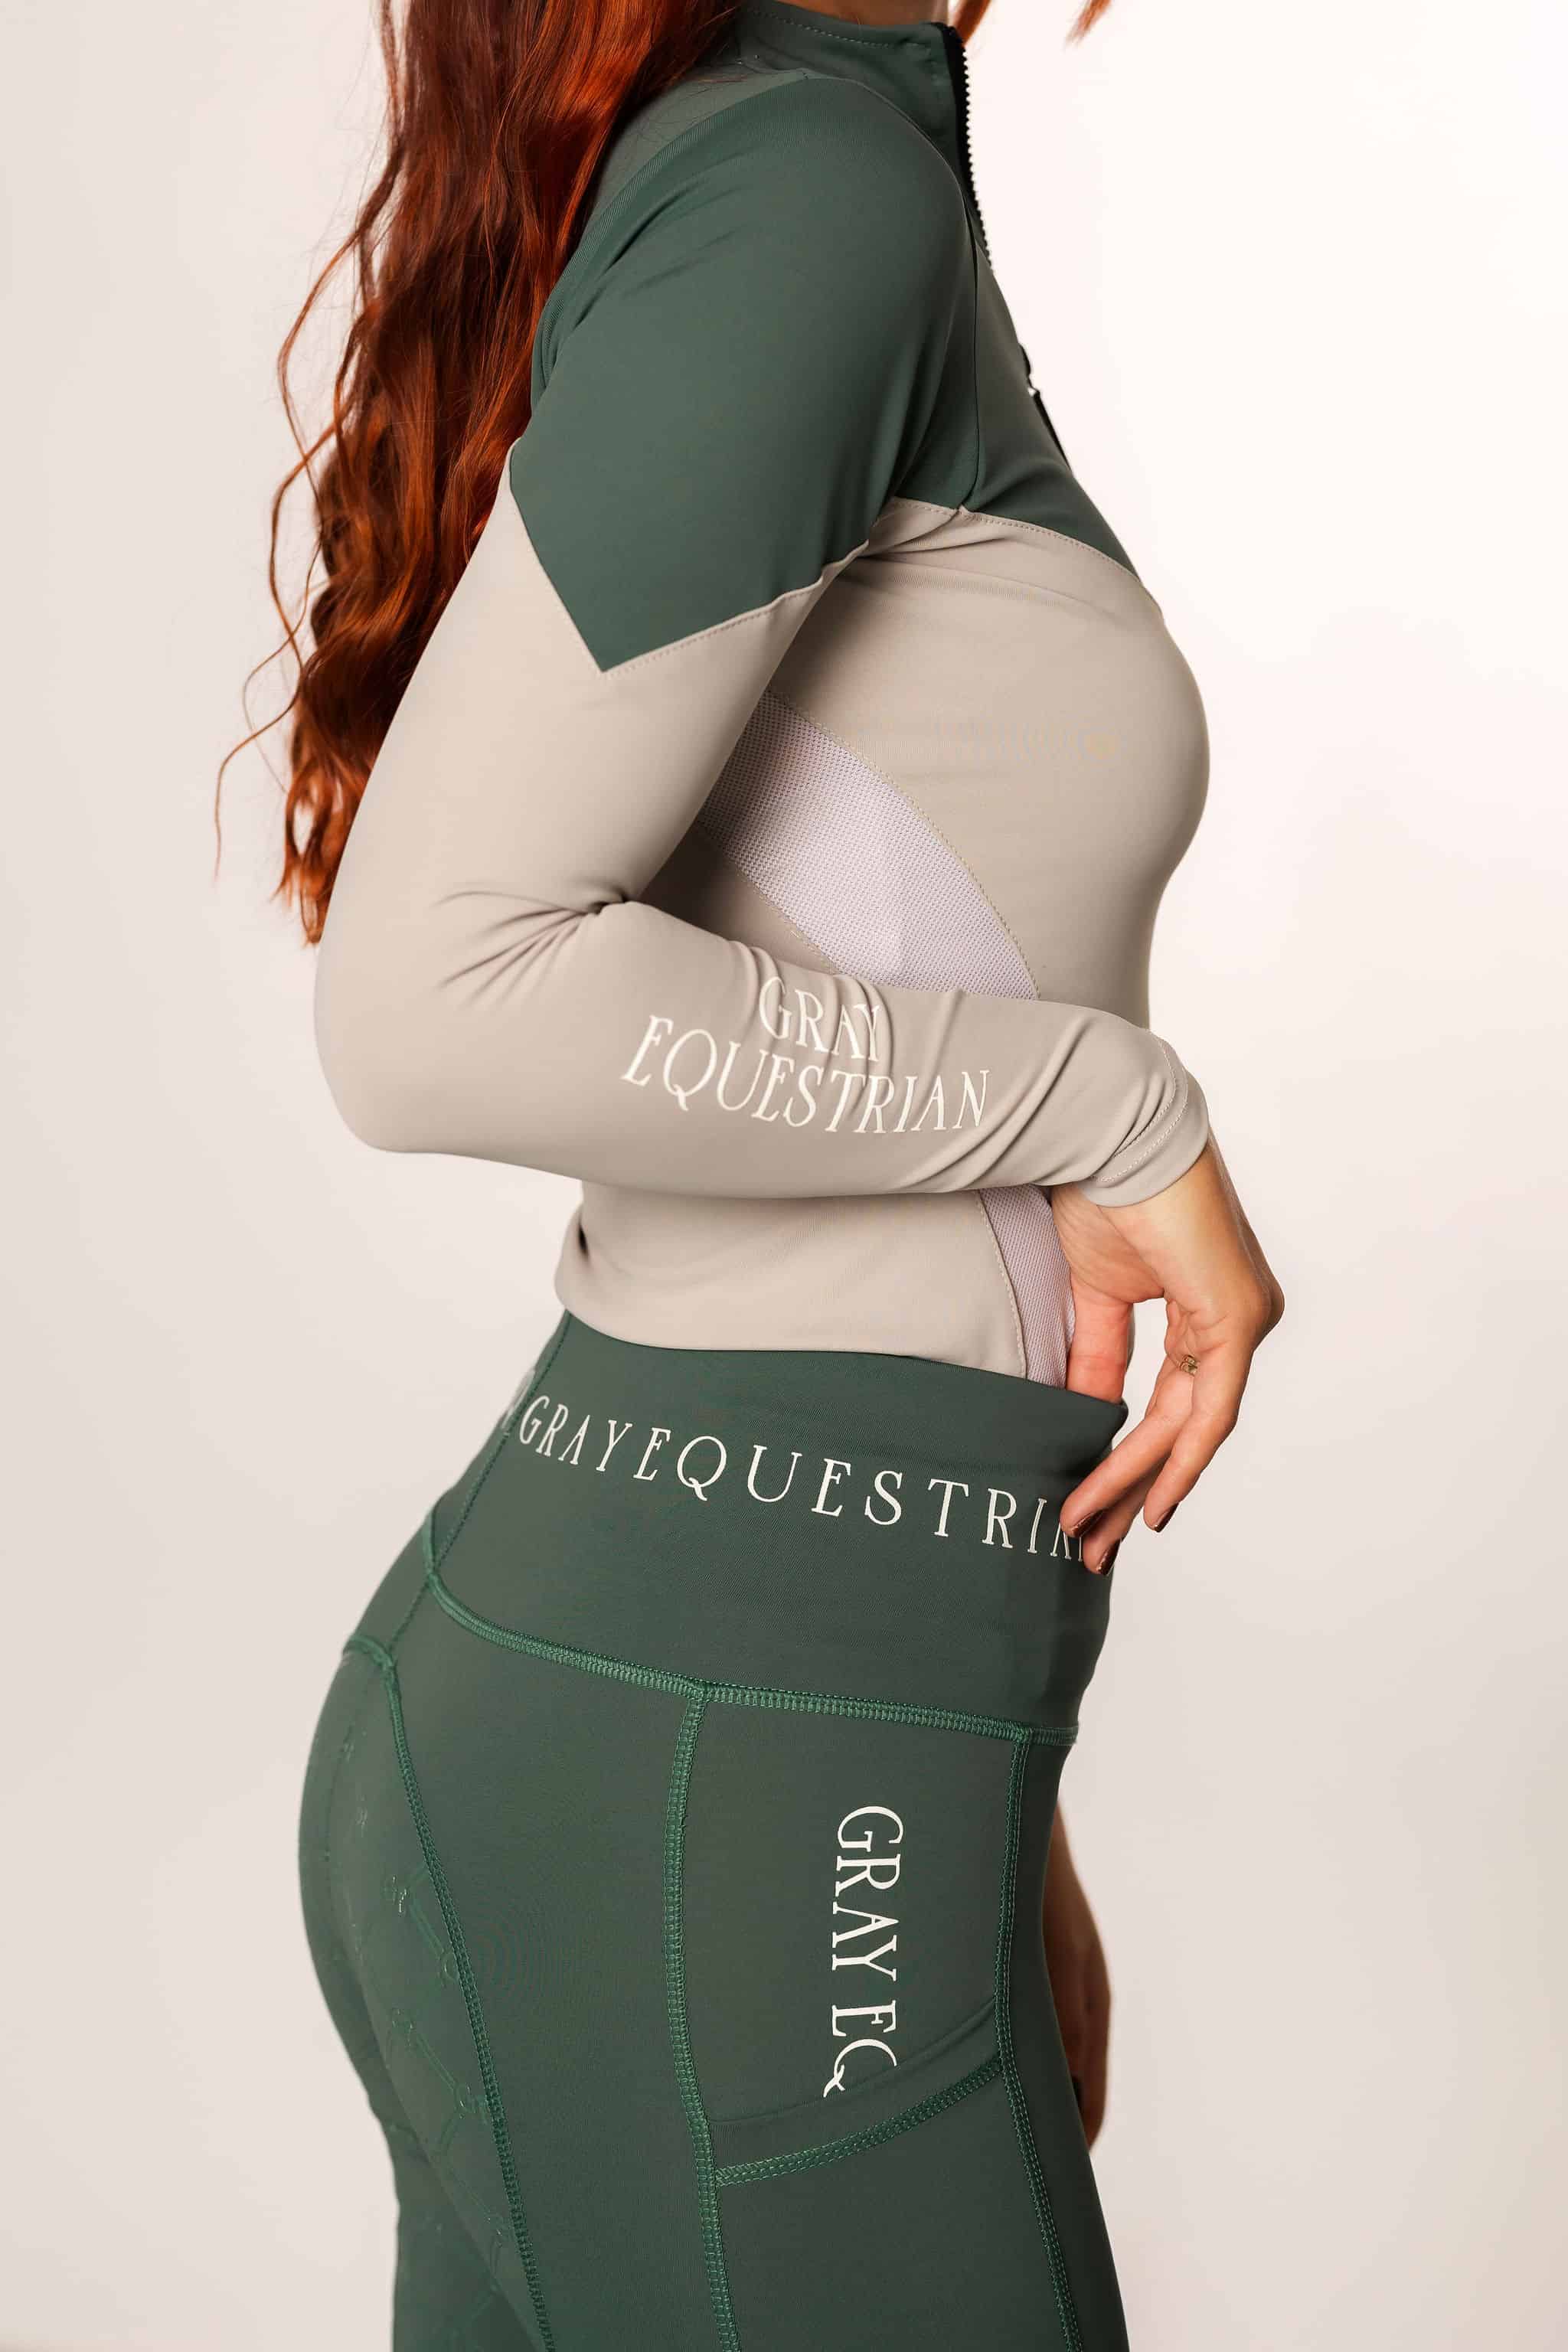 A video of the side of our long sleeved green and grey two toned base layer.